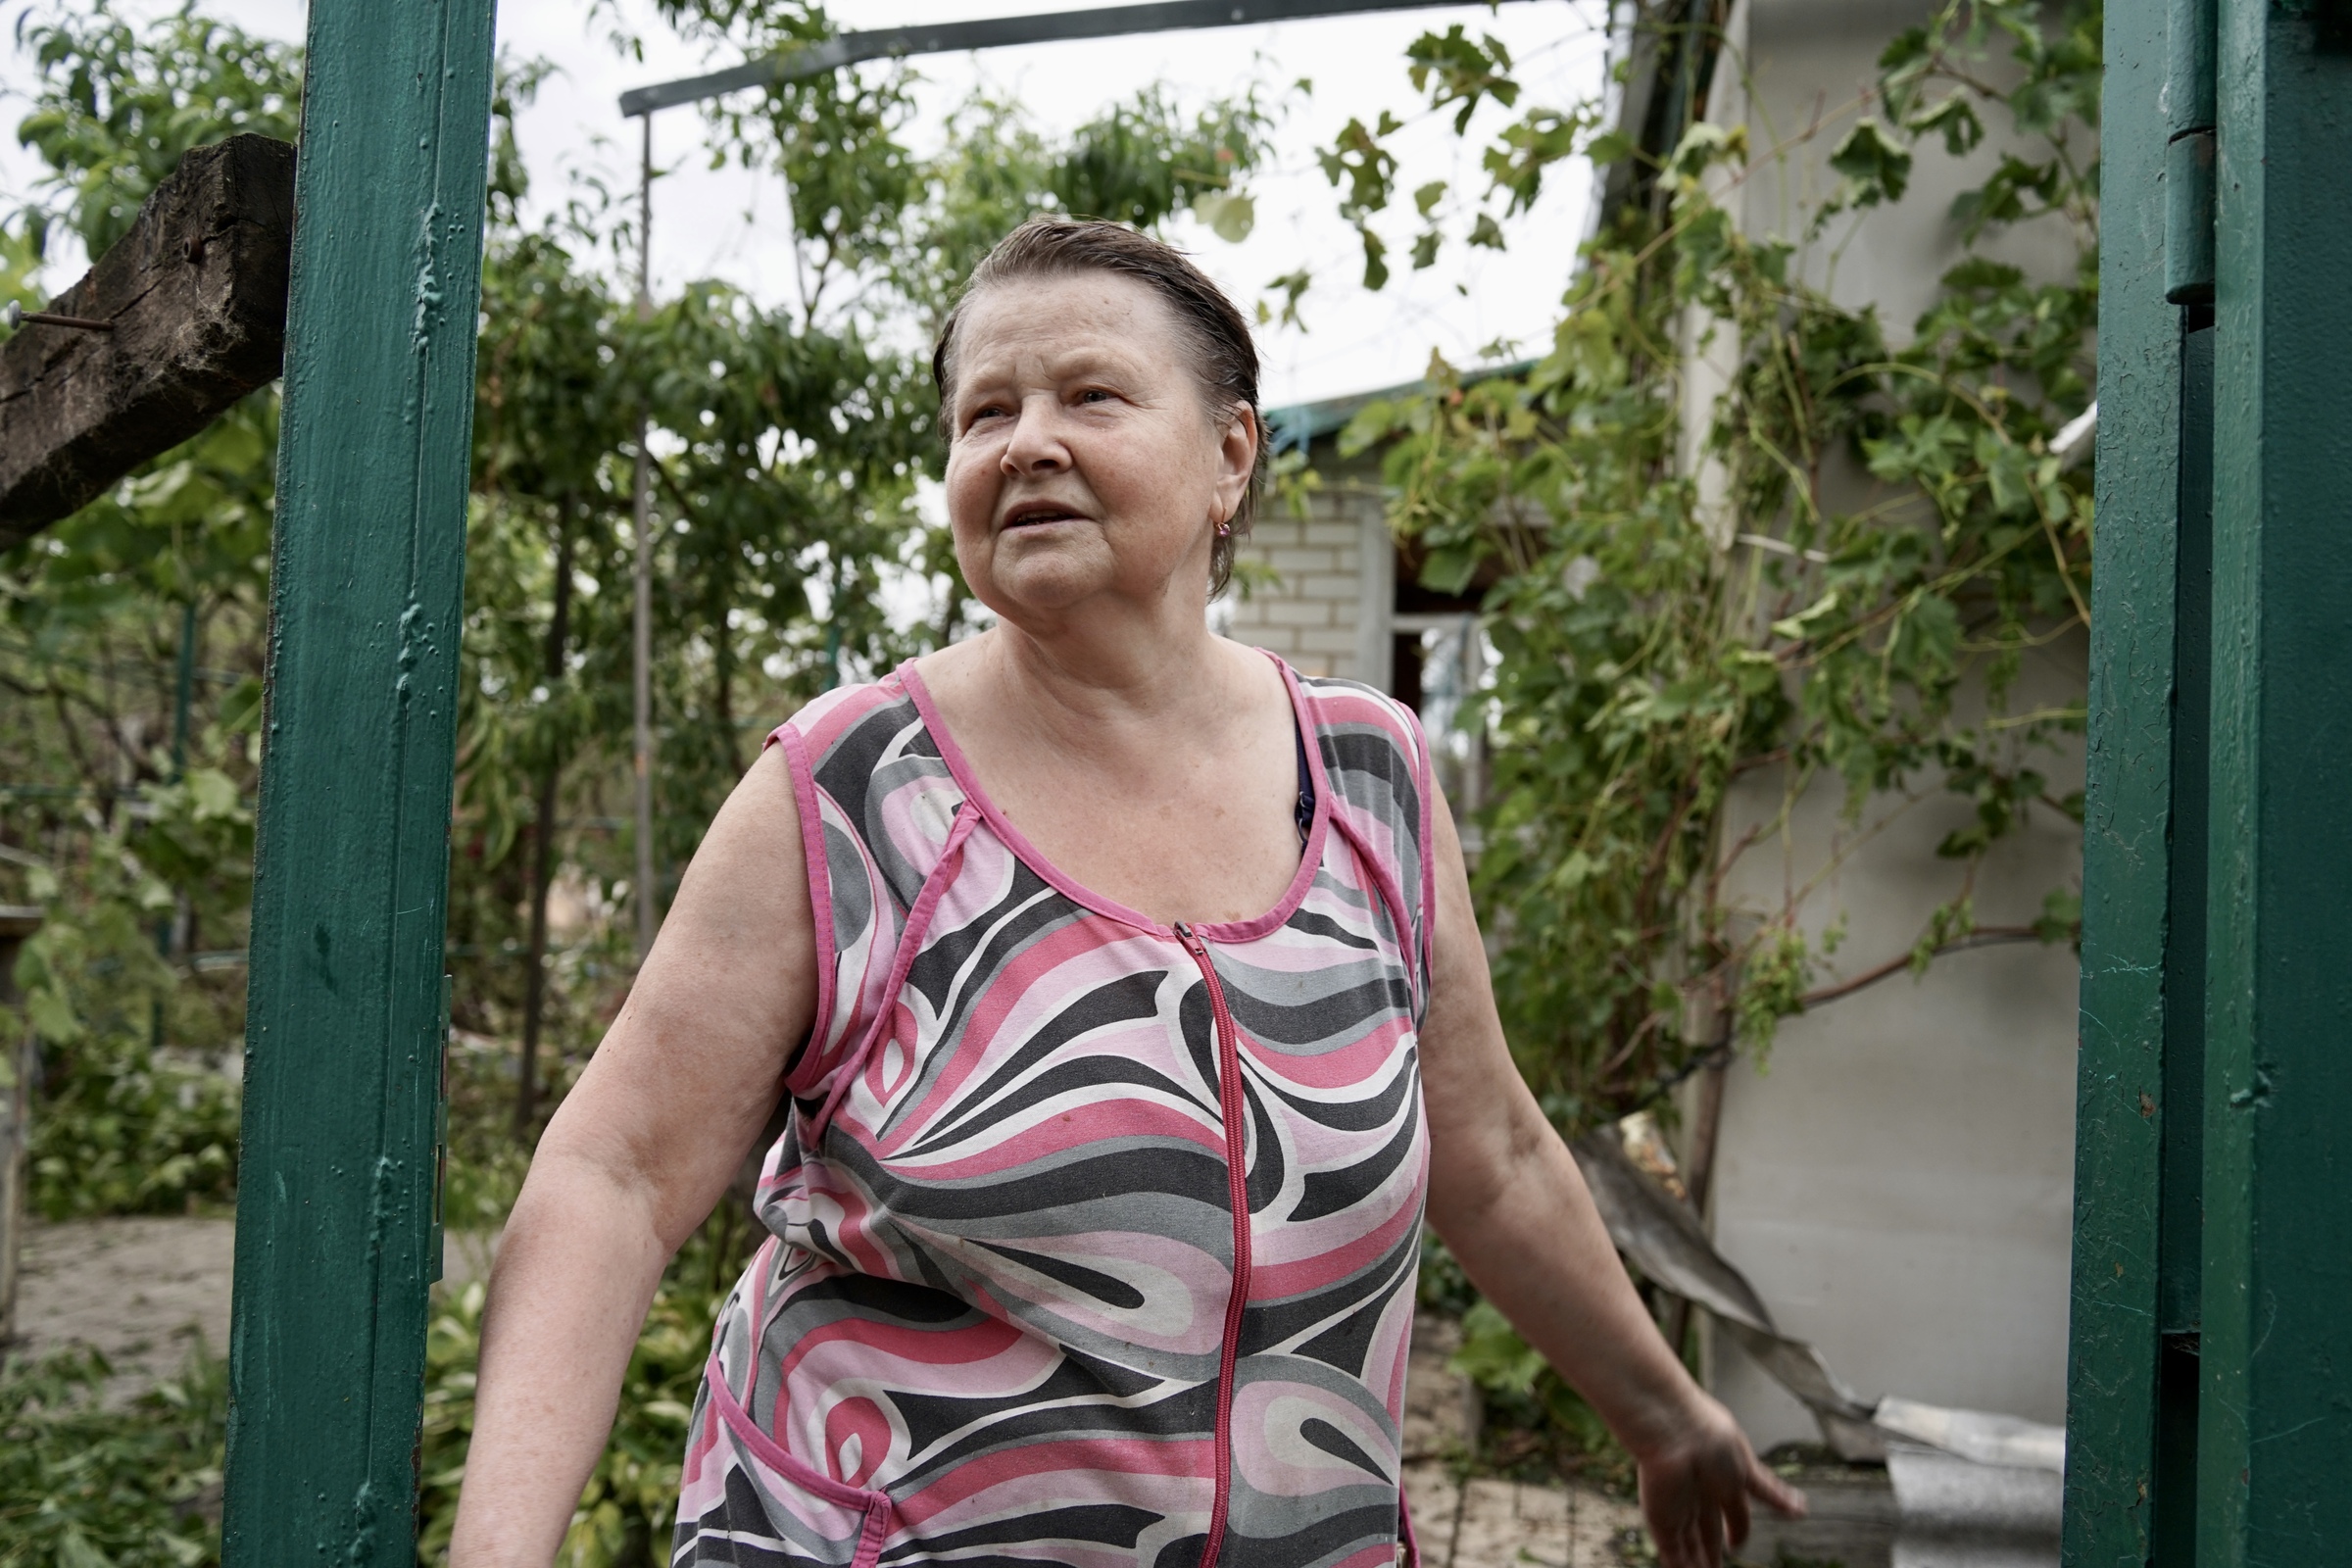 Svitlana, owner of the house destroyed by Russian glide bomb / Photo: Denys Klymenko for Gwara Media